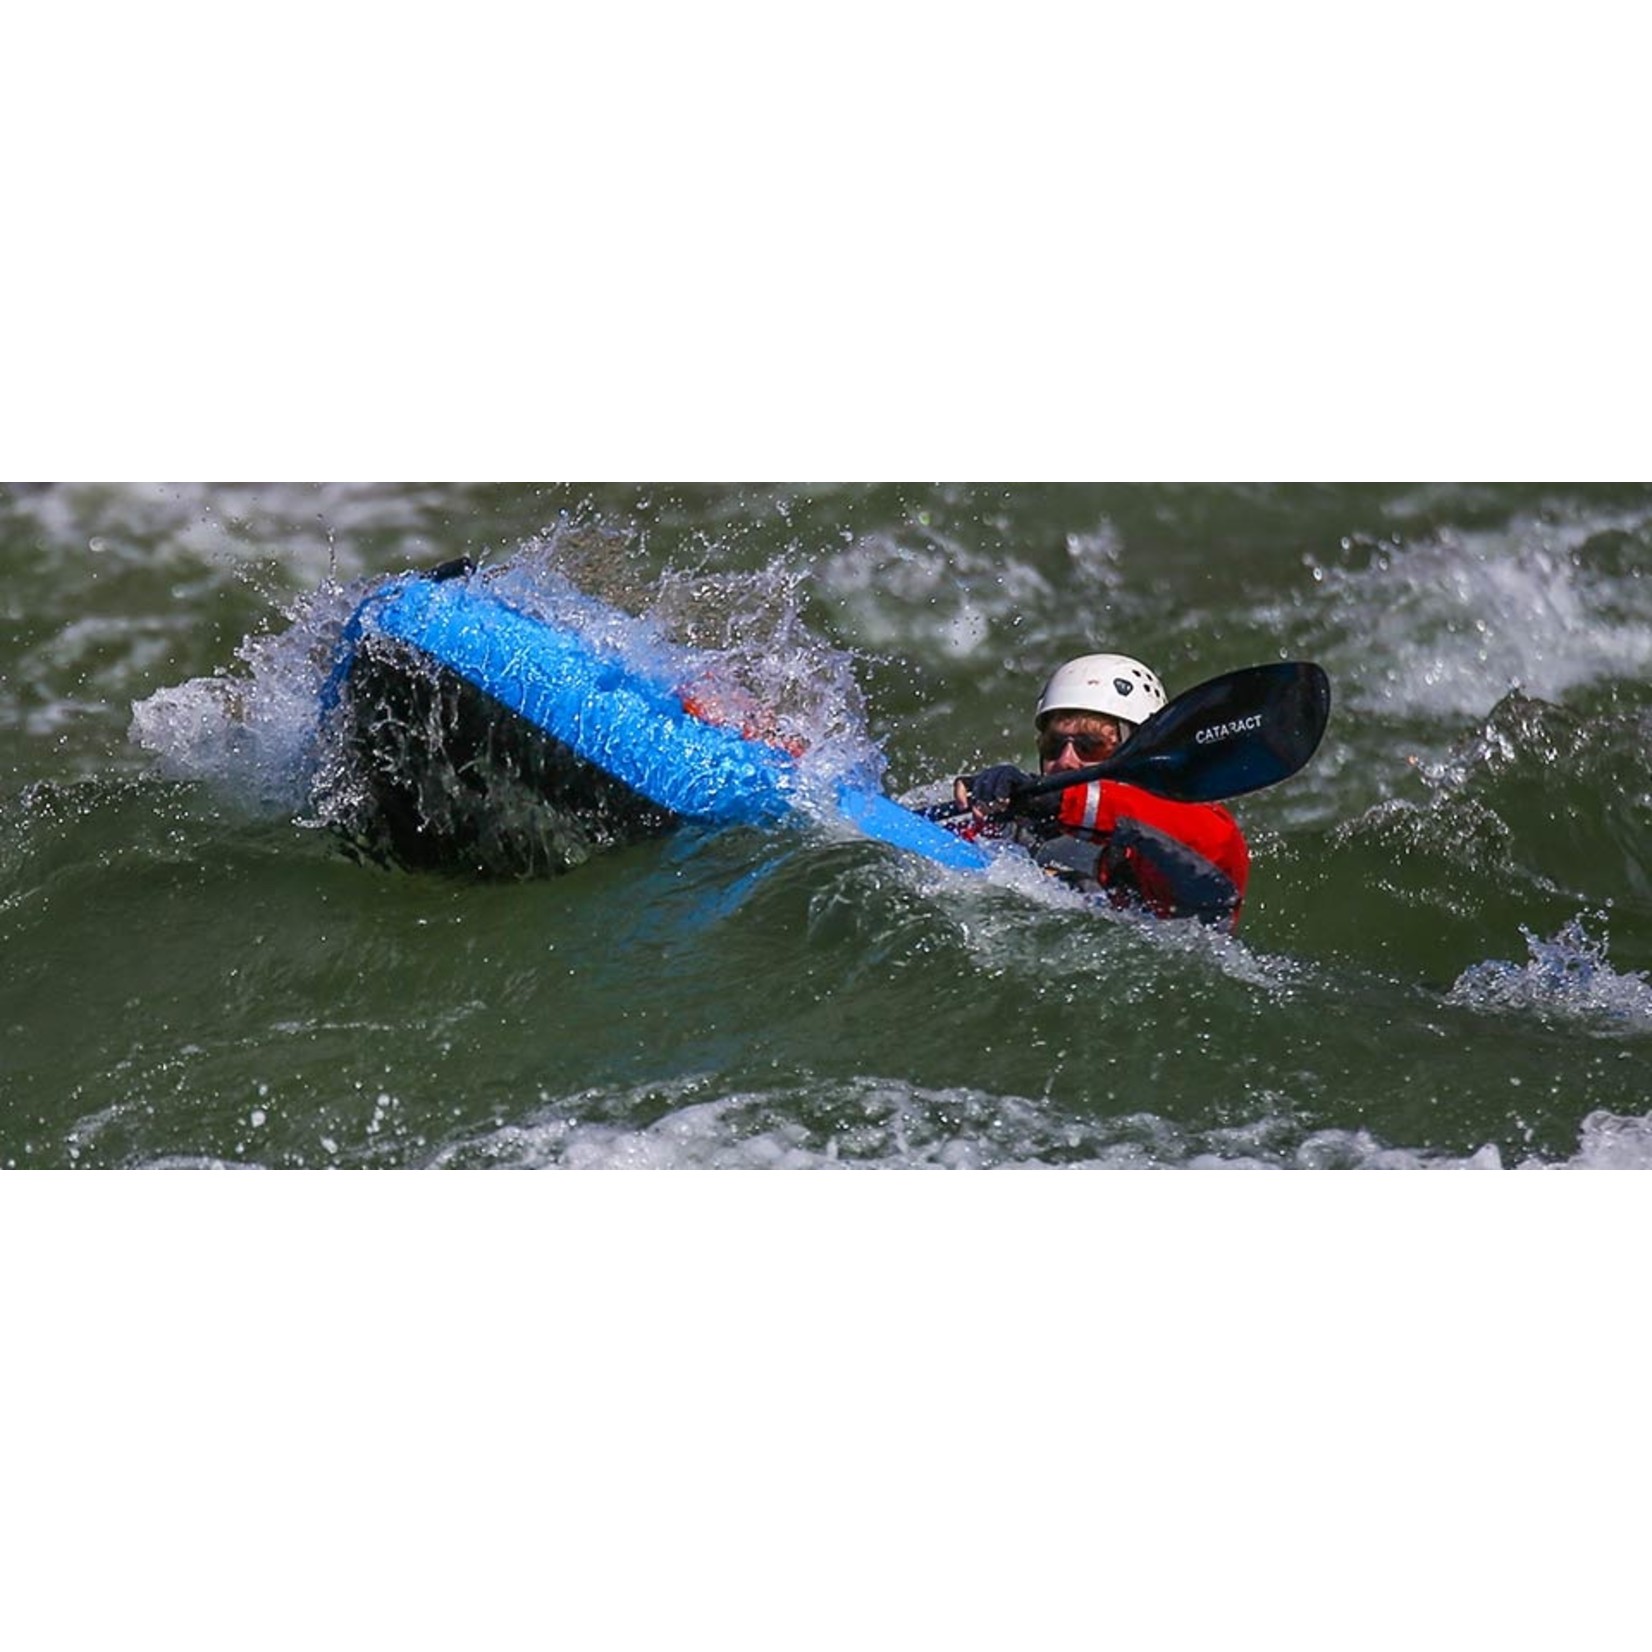 Hyside Inflatables Hyside K1 10.5 Kayak